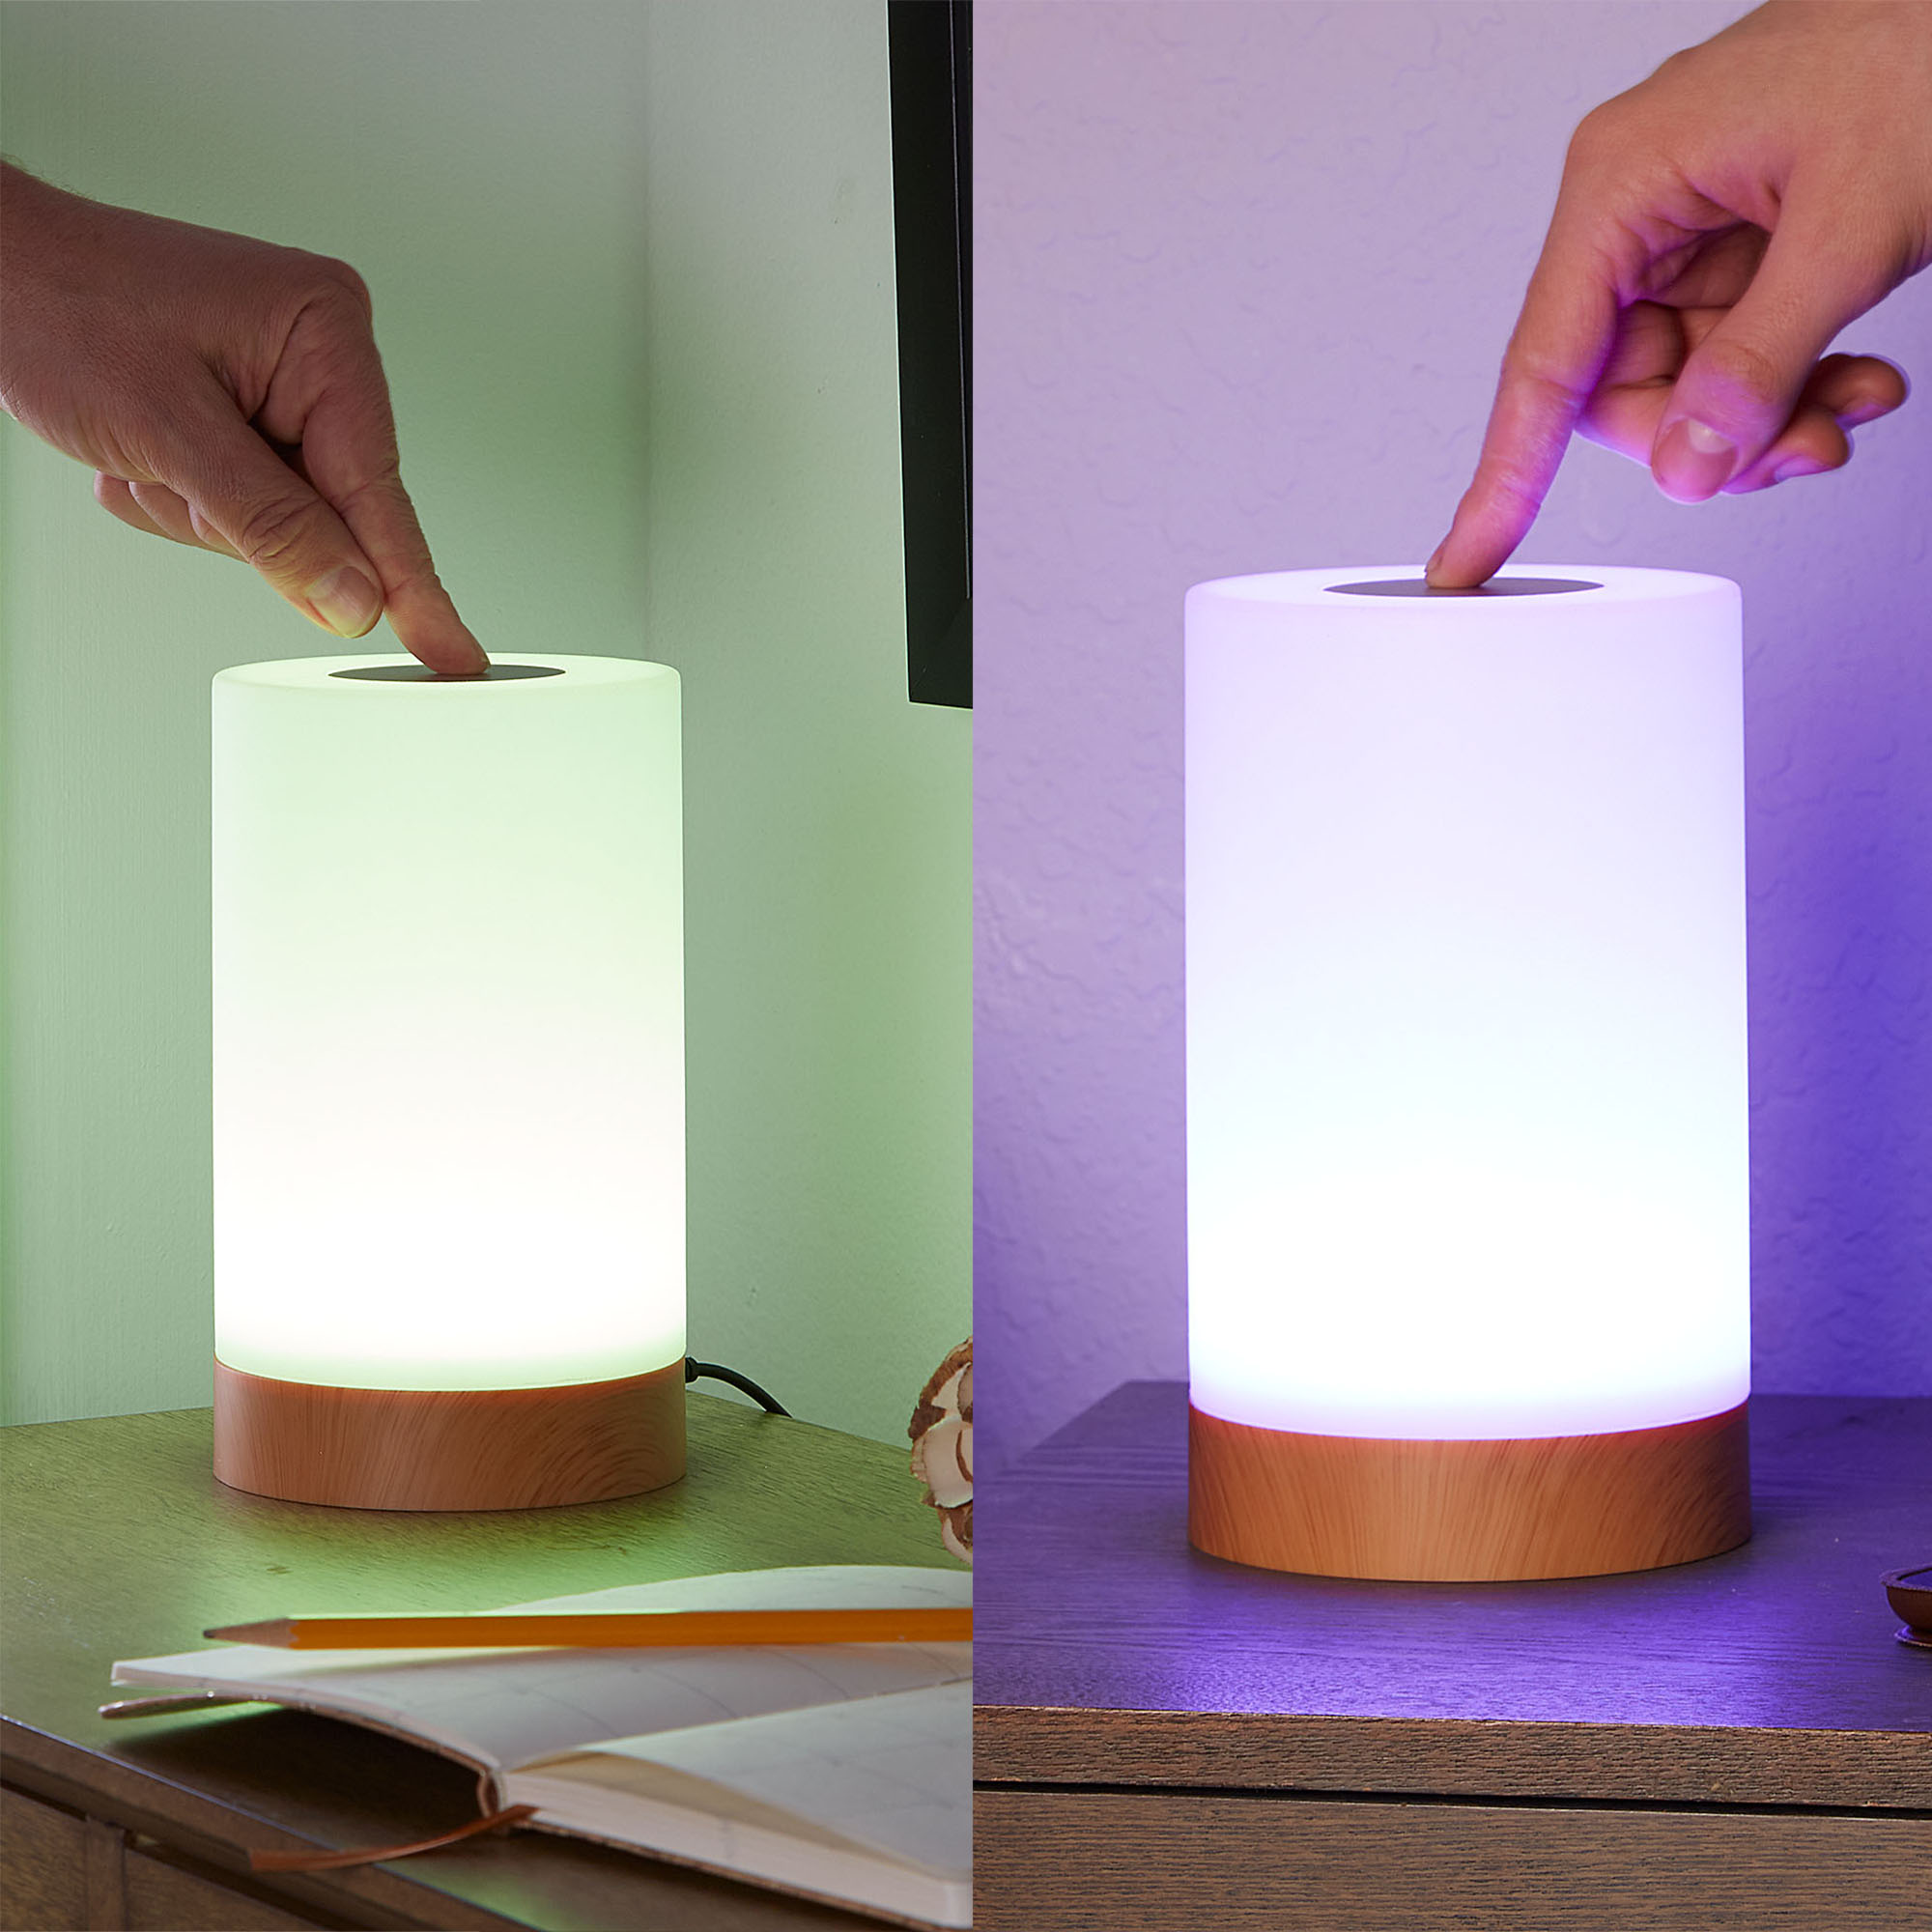 NBG Friendship LED Color Changing Table Lamp with AC Cord, Touch Control Wifi Synchronize Light Set - image 5 of 15